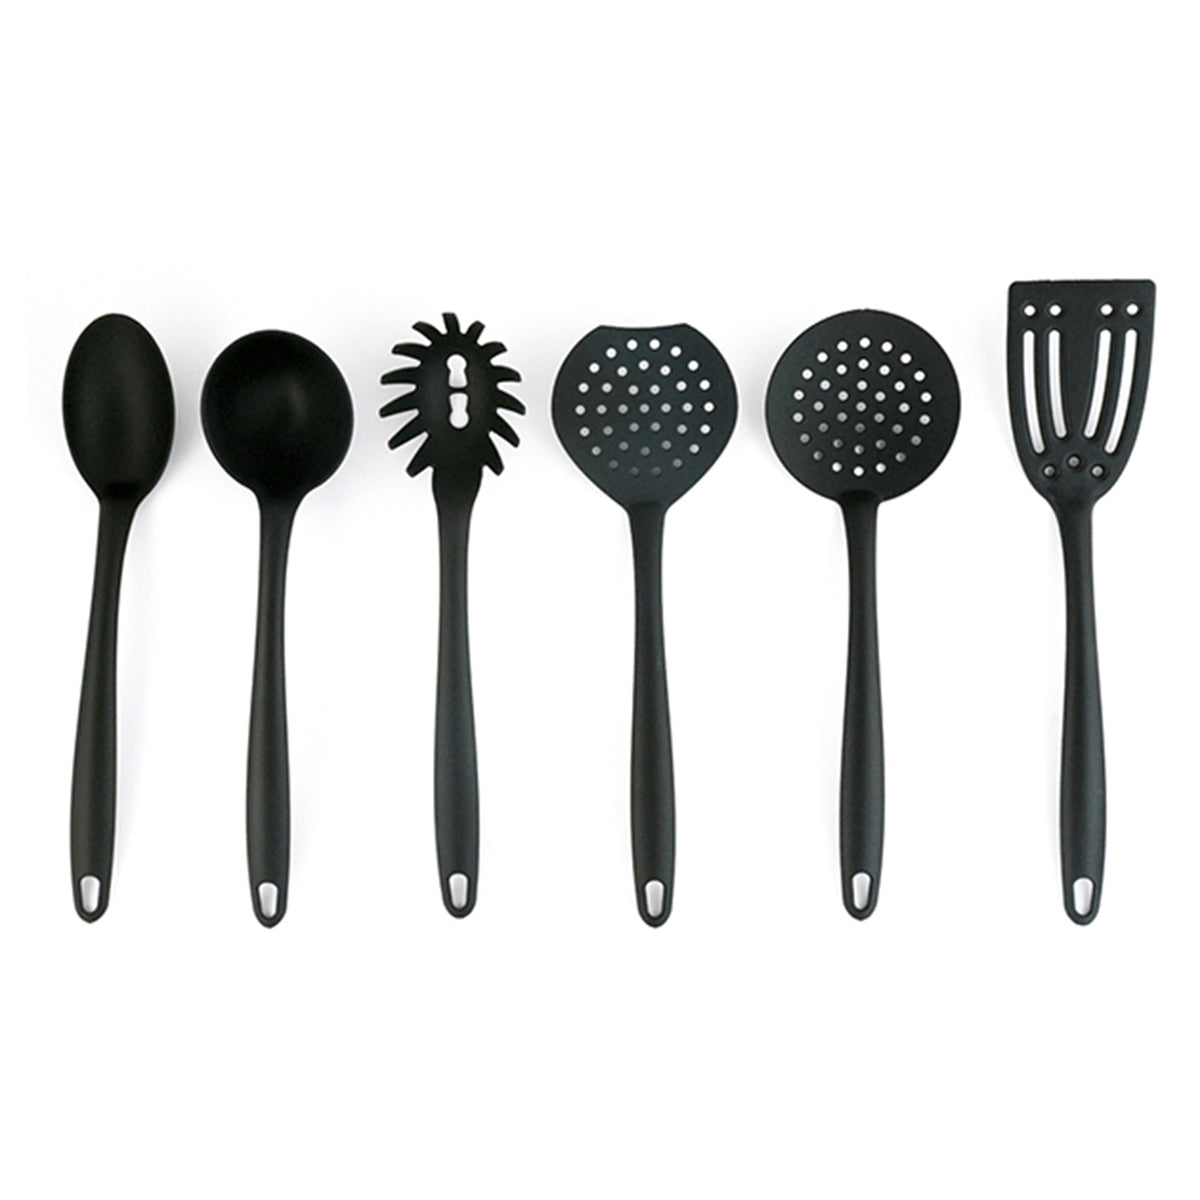 Kitchen tool set - Black A high quality set of kitchen tools for multiple use.